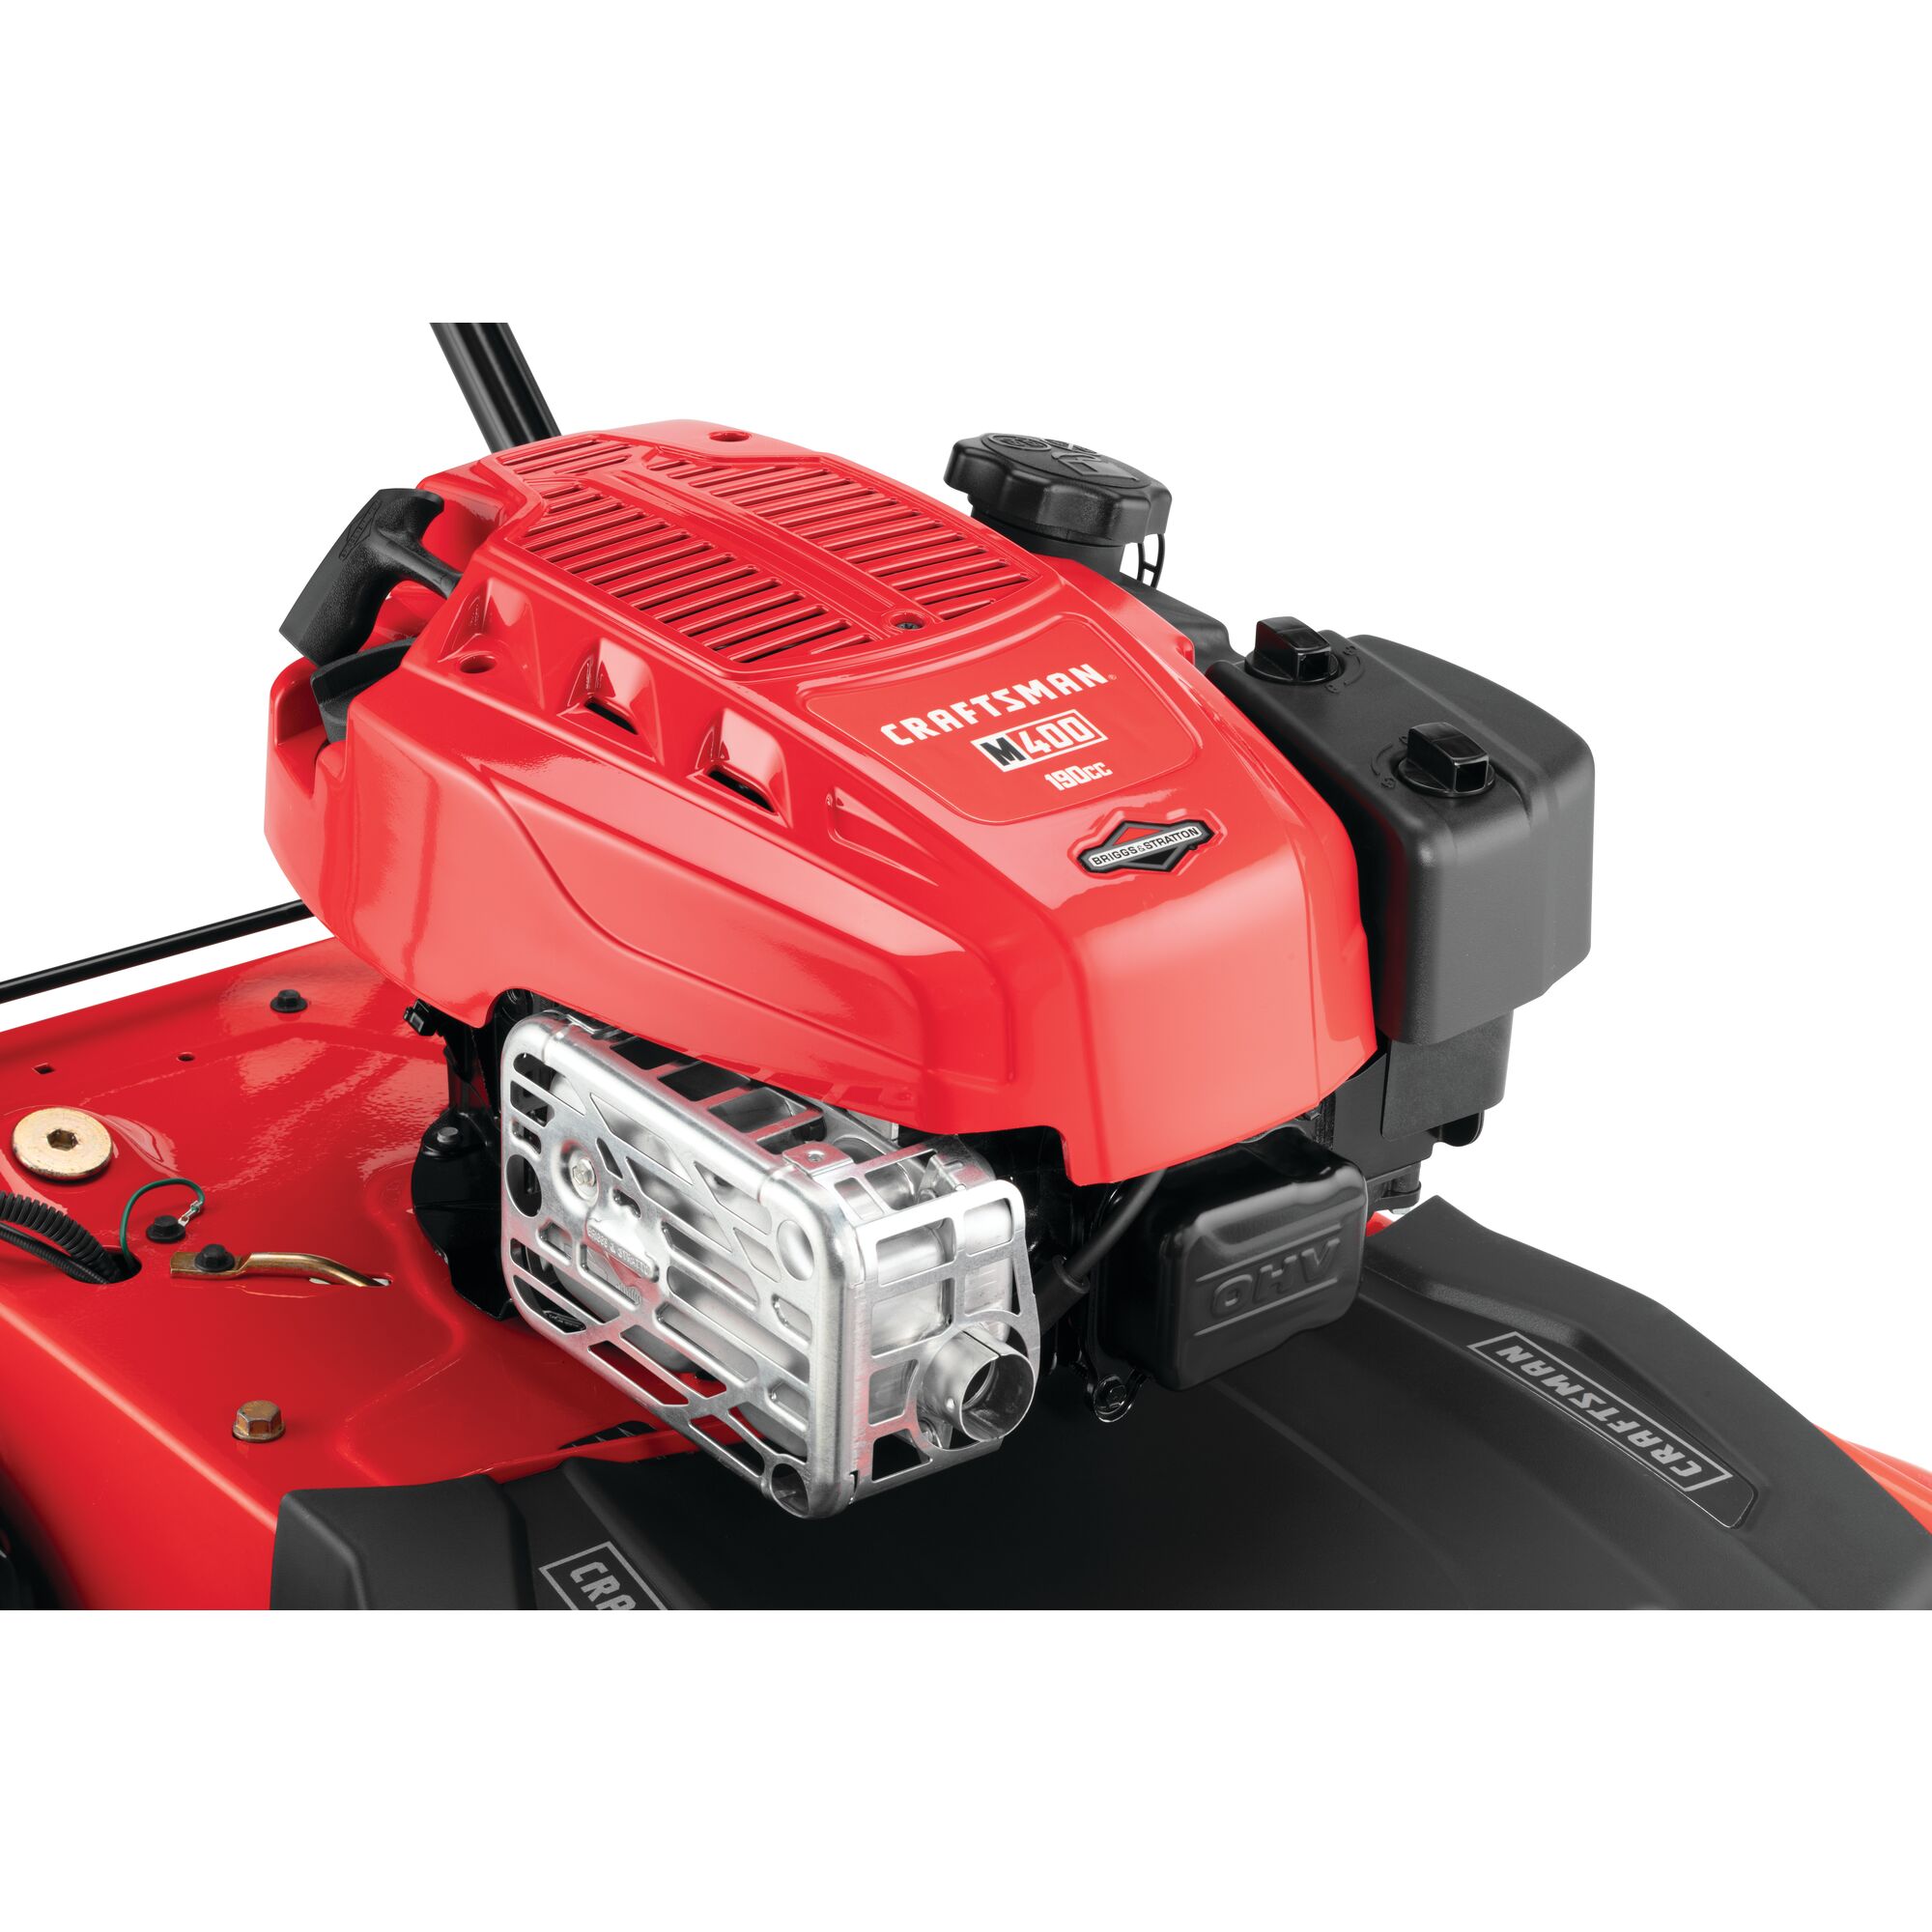 Powerful motor feature of 28 inch 190 c c r w d self propelled mower.